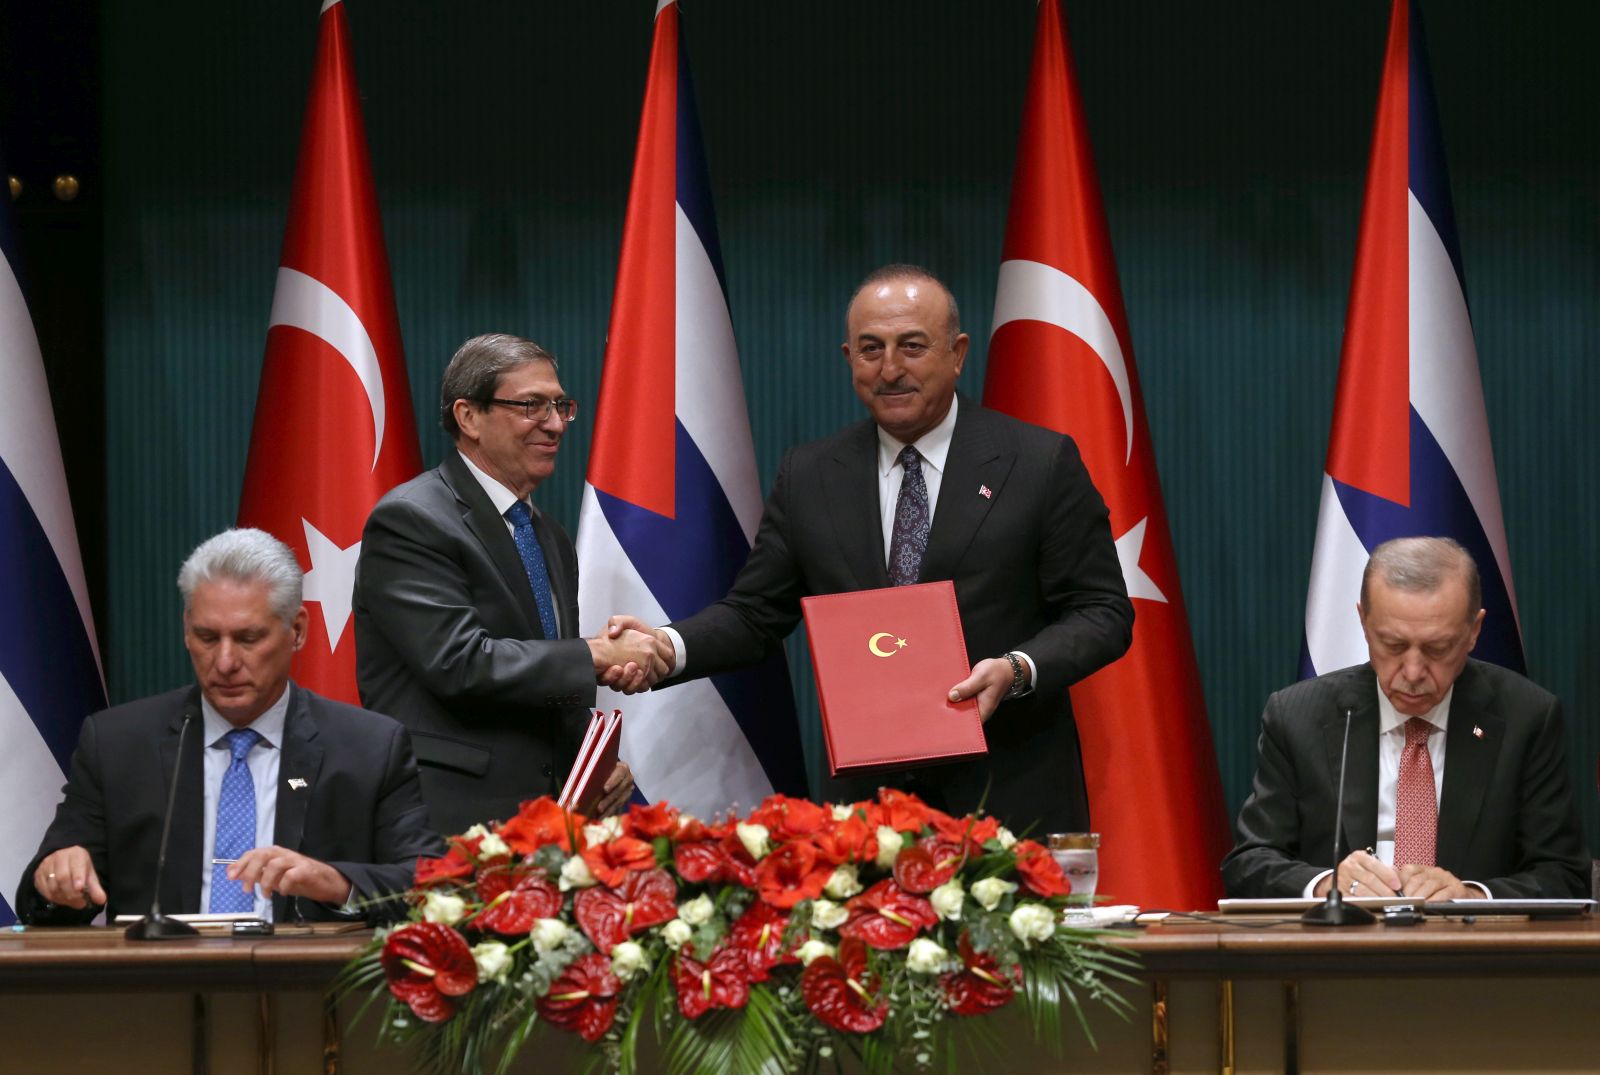 epa10323373 Turkish President Recep Tayyip Erdogan (R), Turkish Foreign Minister Mevlut Cavusoglu (2-R), Cuban President Miguel Diaz-Canel (L) and Cuban Foreign Minister Bruno Rodriguez  (2-L) attend a press conference after their meeting at the Presidential Palace in Ankara, Turkey, 23 November 2022. Cuban President Miguel Mario Diaz-Canel Bermudez is in Turkey for a three day official visit to have talks on bilateral relations between the countries.  EPA/NECATI SAVAS